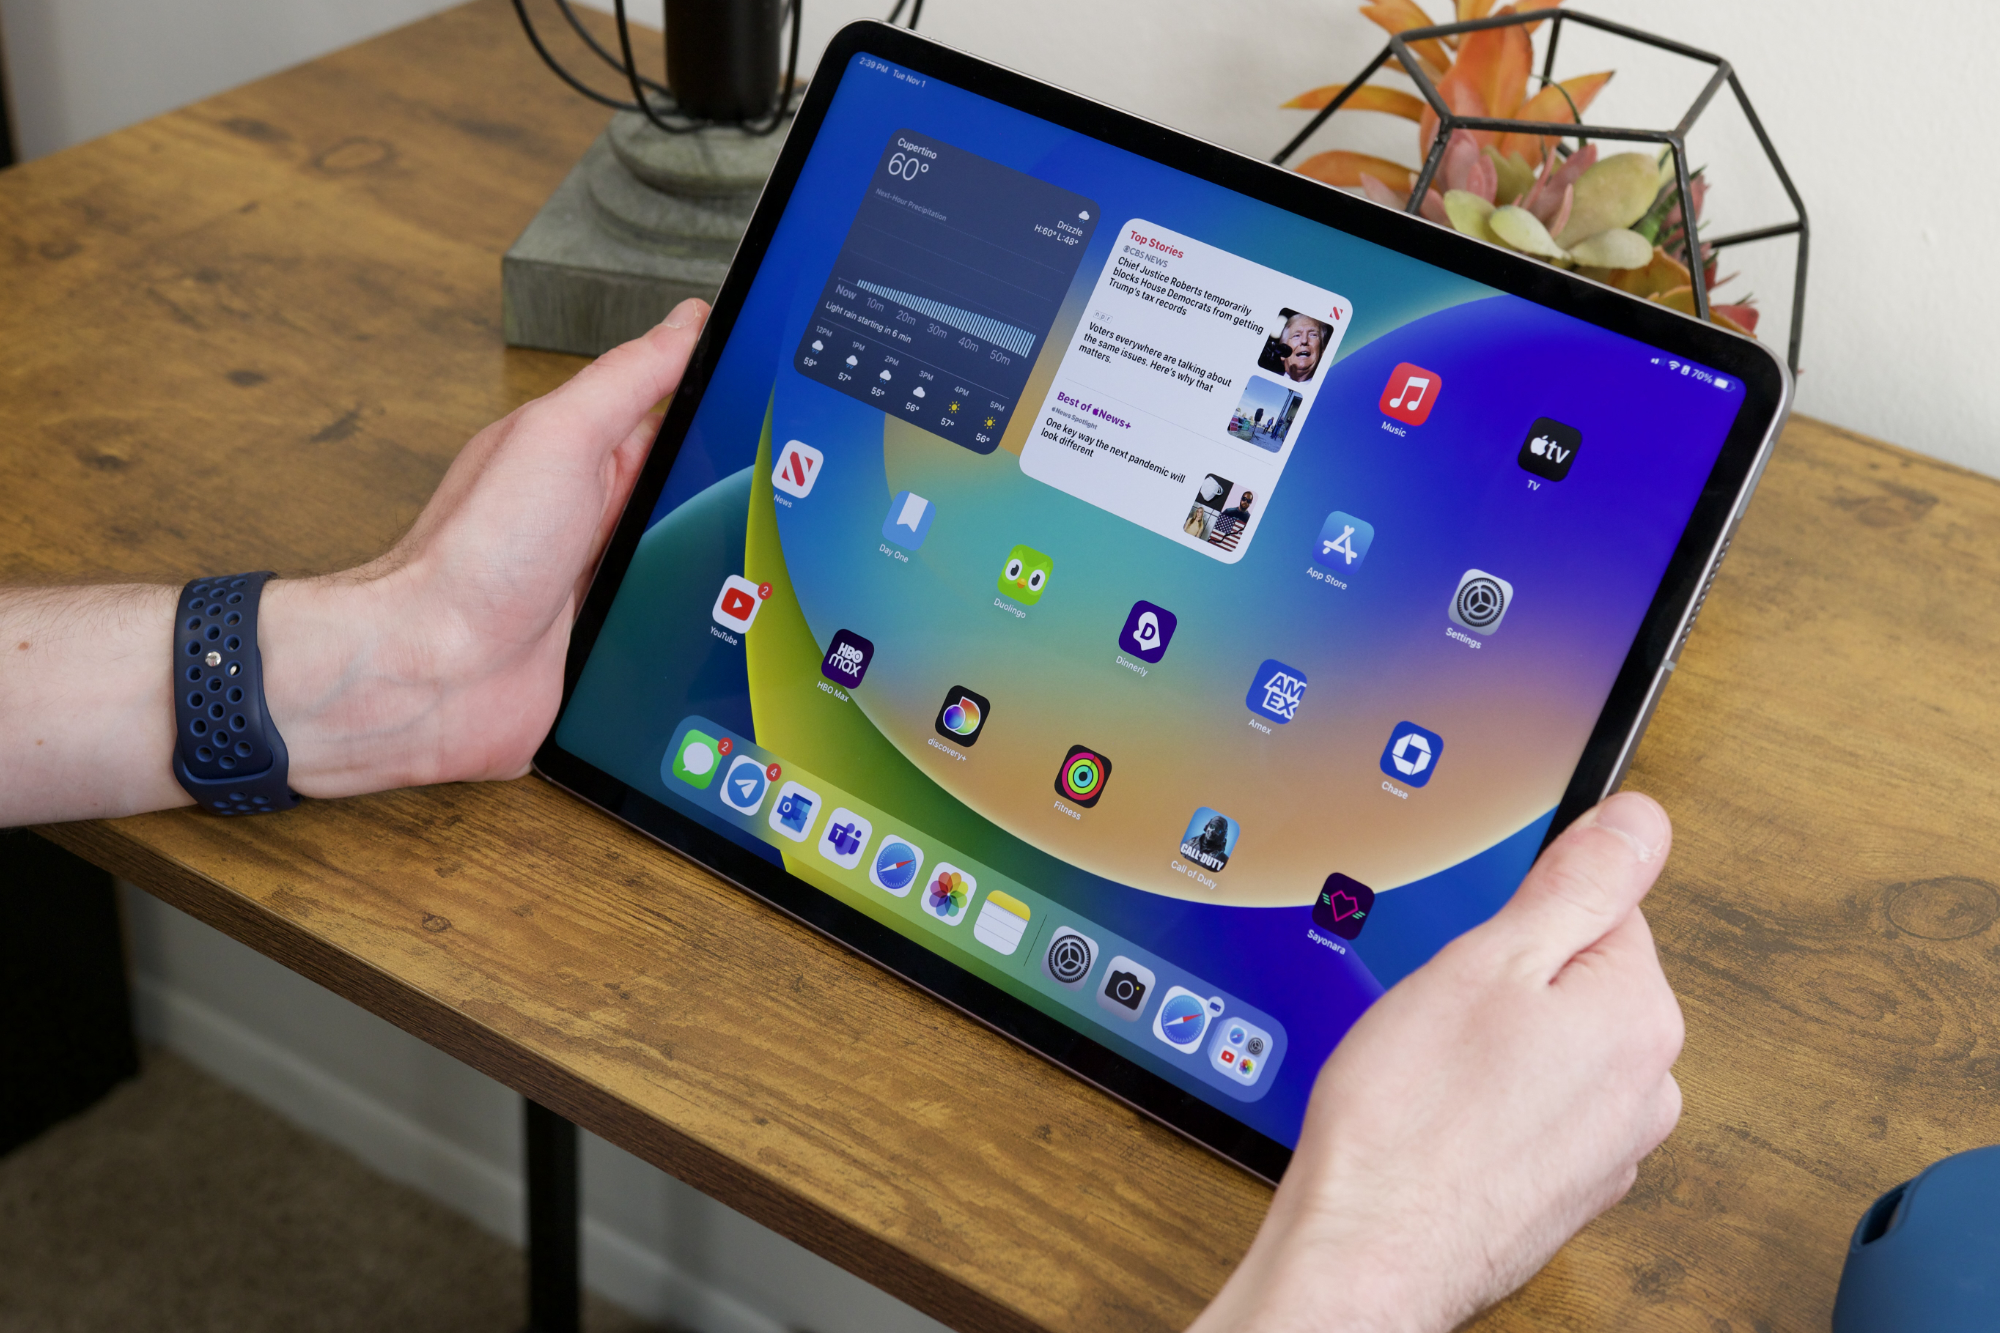 Best iPad Pro deals: Save on the 11-inch and 12.9-inch